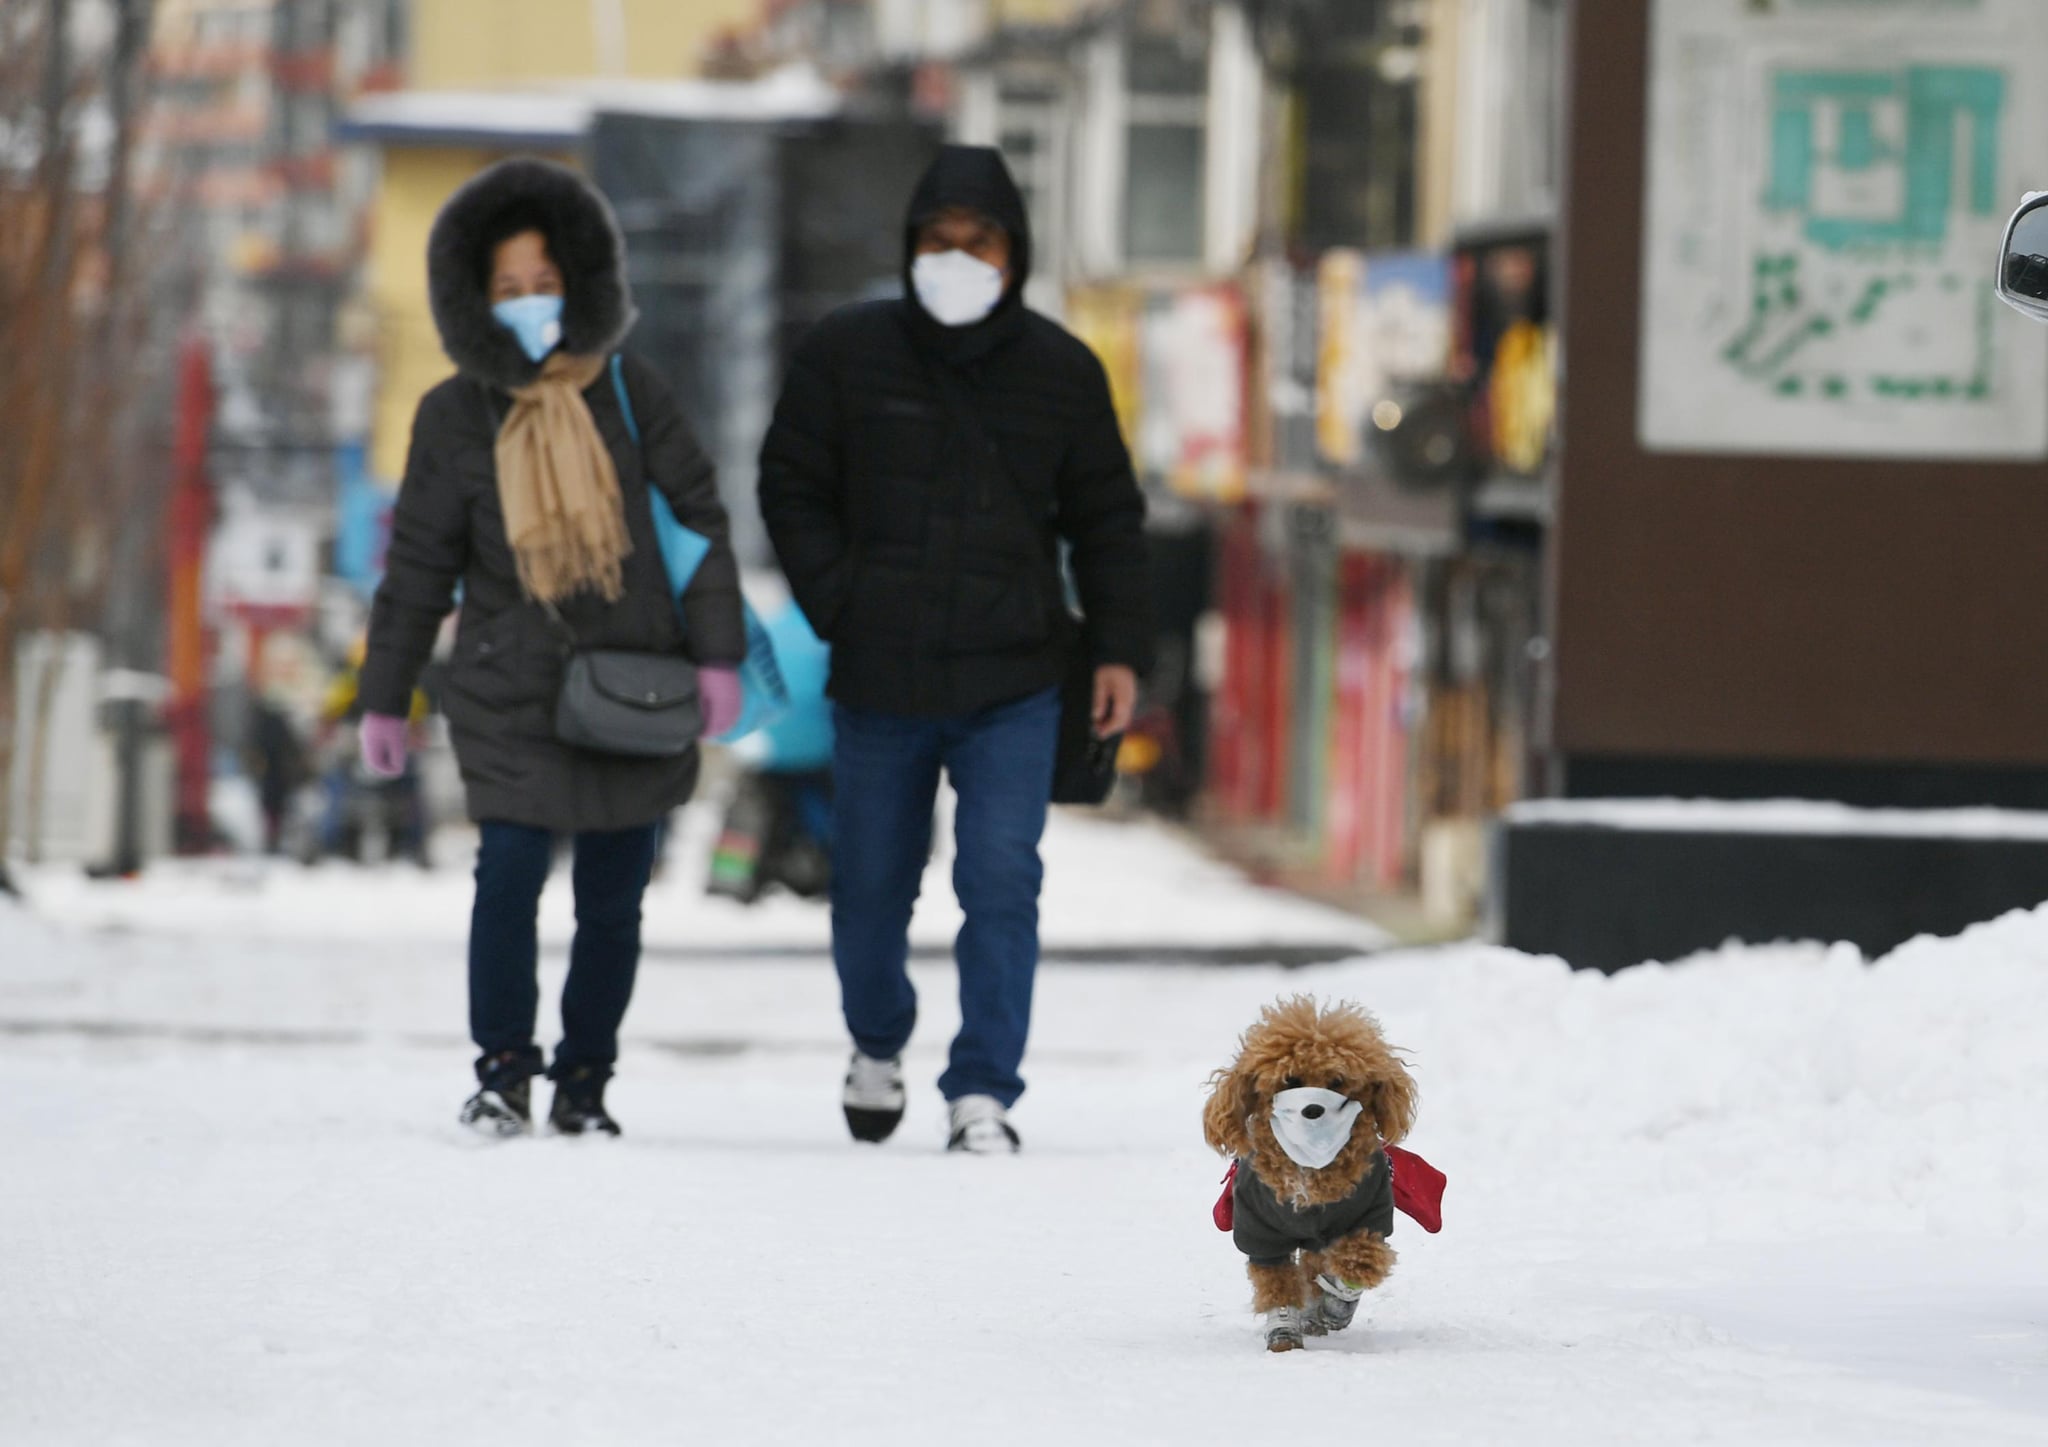 CHANGCHUN, CHINA - MARCH 04: A pet dog wearing face mask walks with owner on snow amid novel coronavirus outbreak on March 4, 2020 in Changchun, Jilin Province of China. (Photo by Zhang Yao/China News Service via Getty Images)